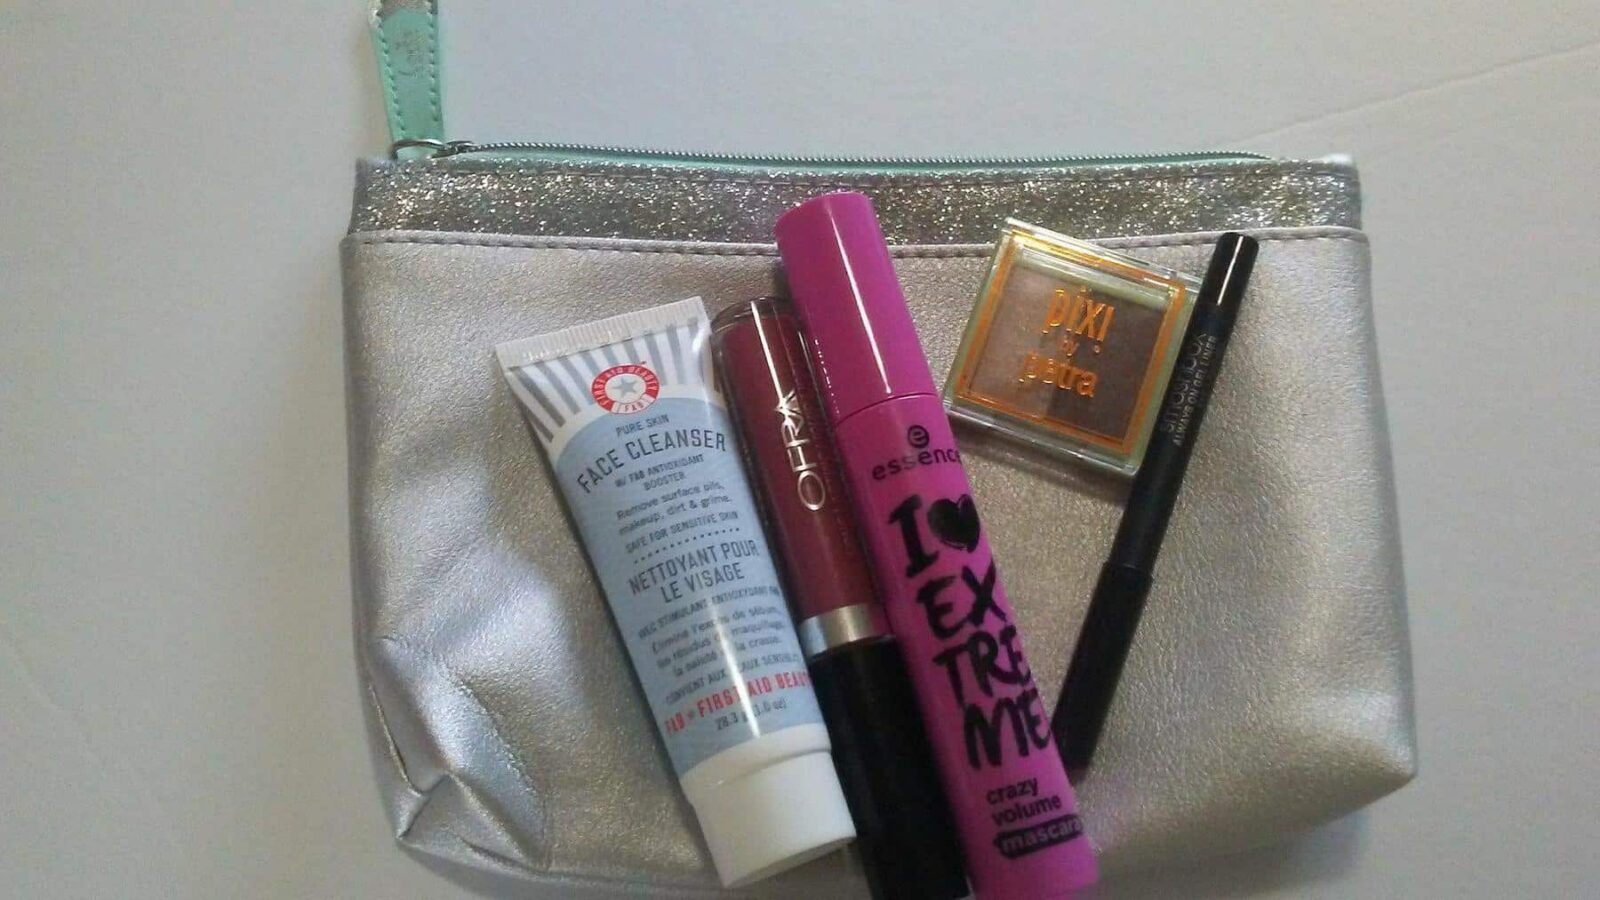 December ipsy Glam bag with Smashbox, Pixi by Petra